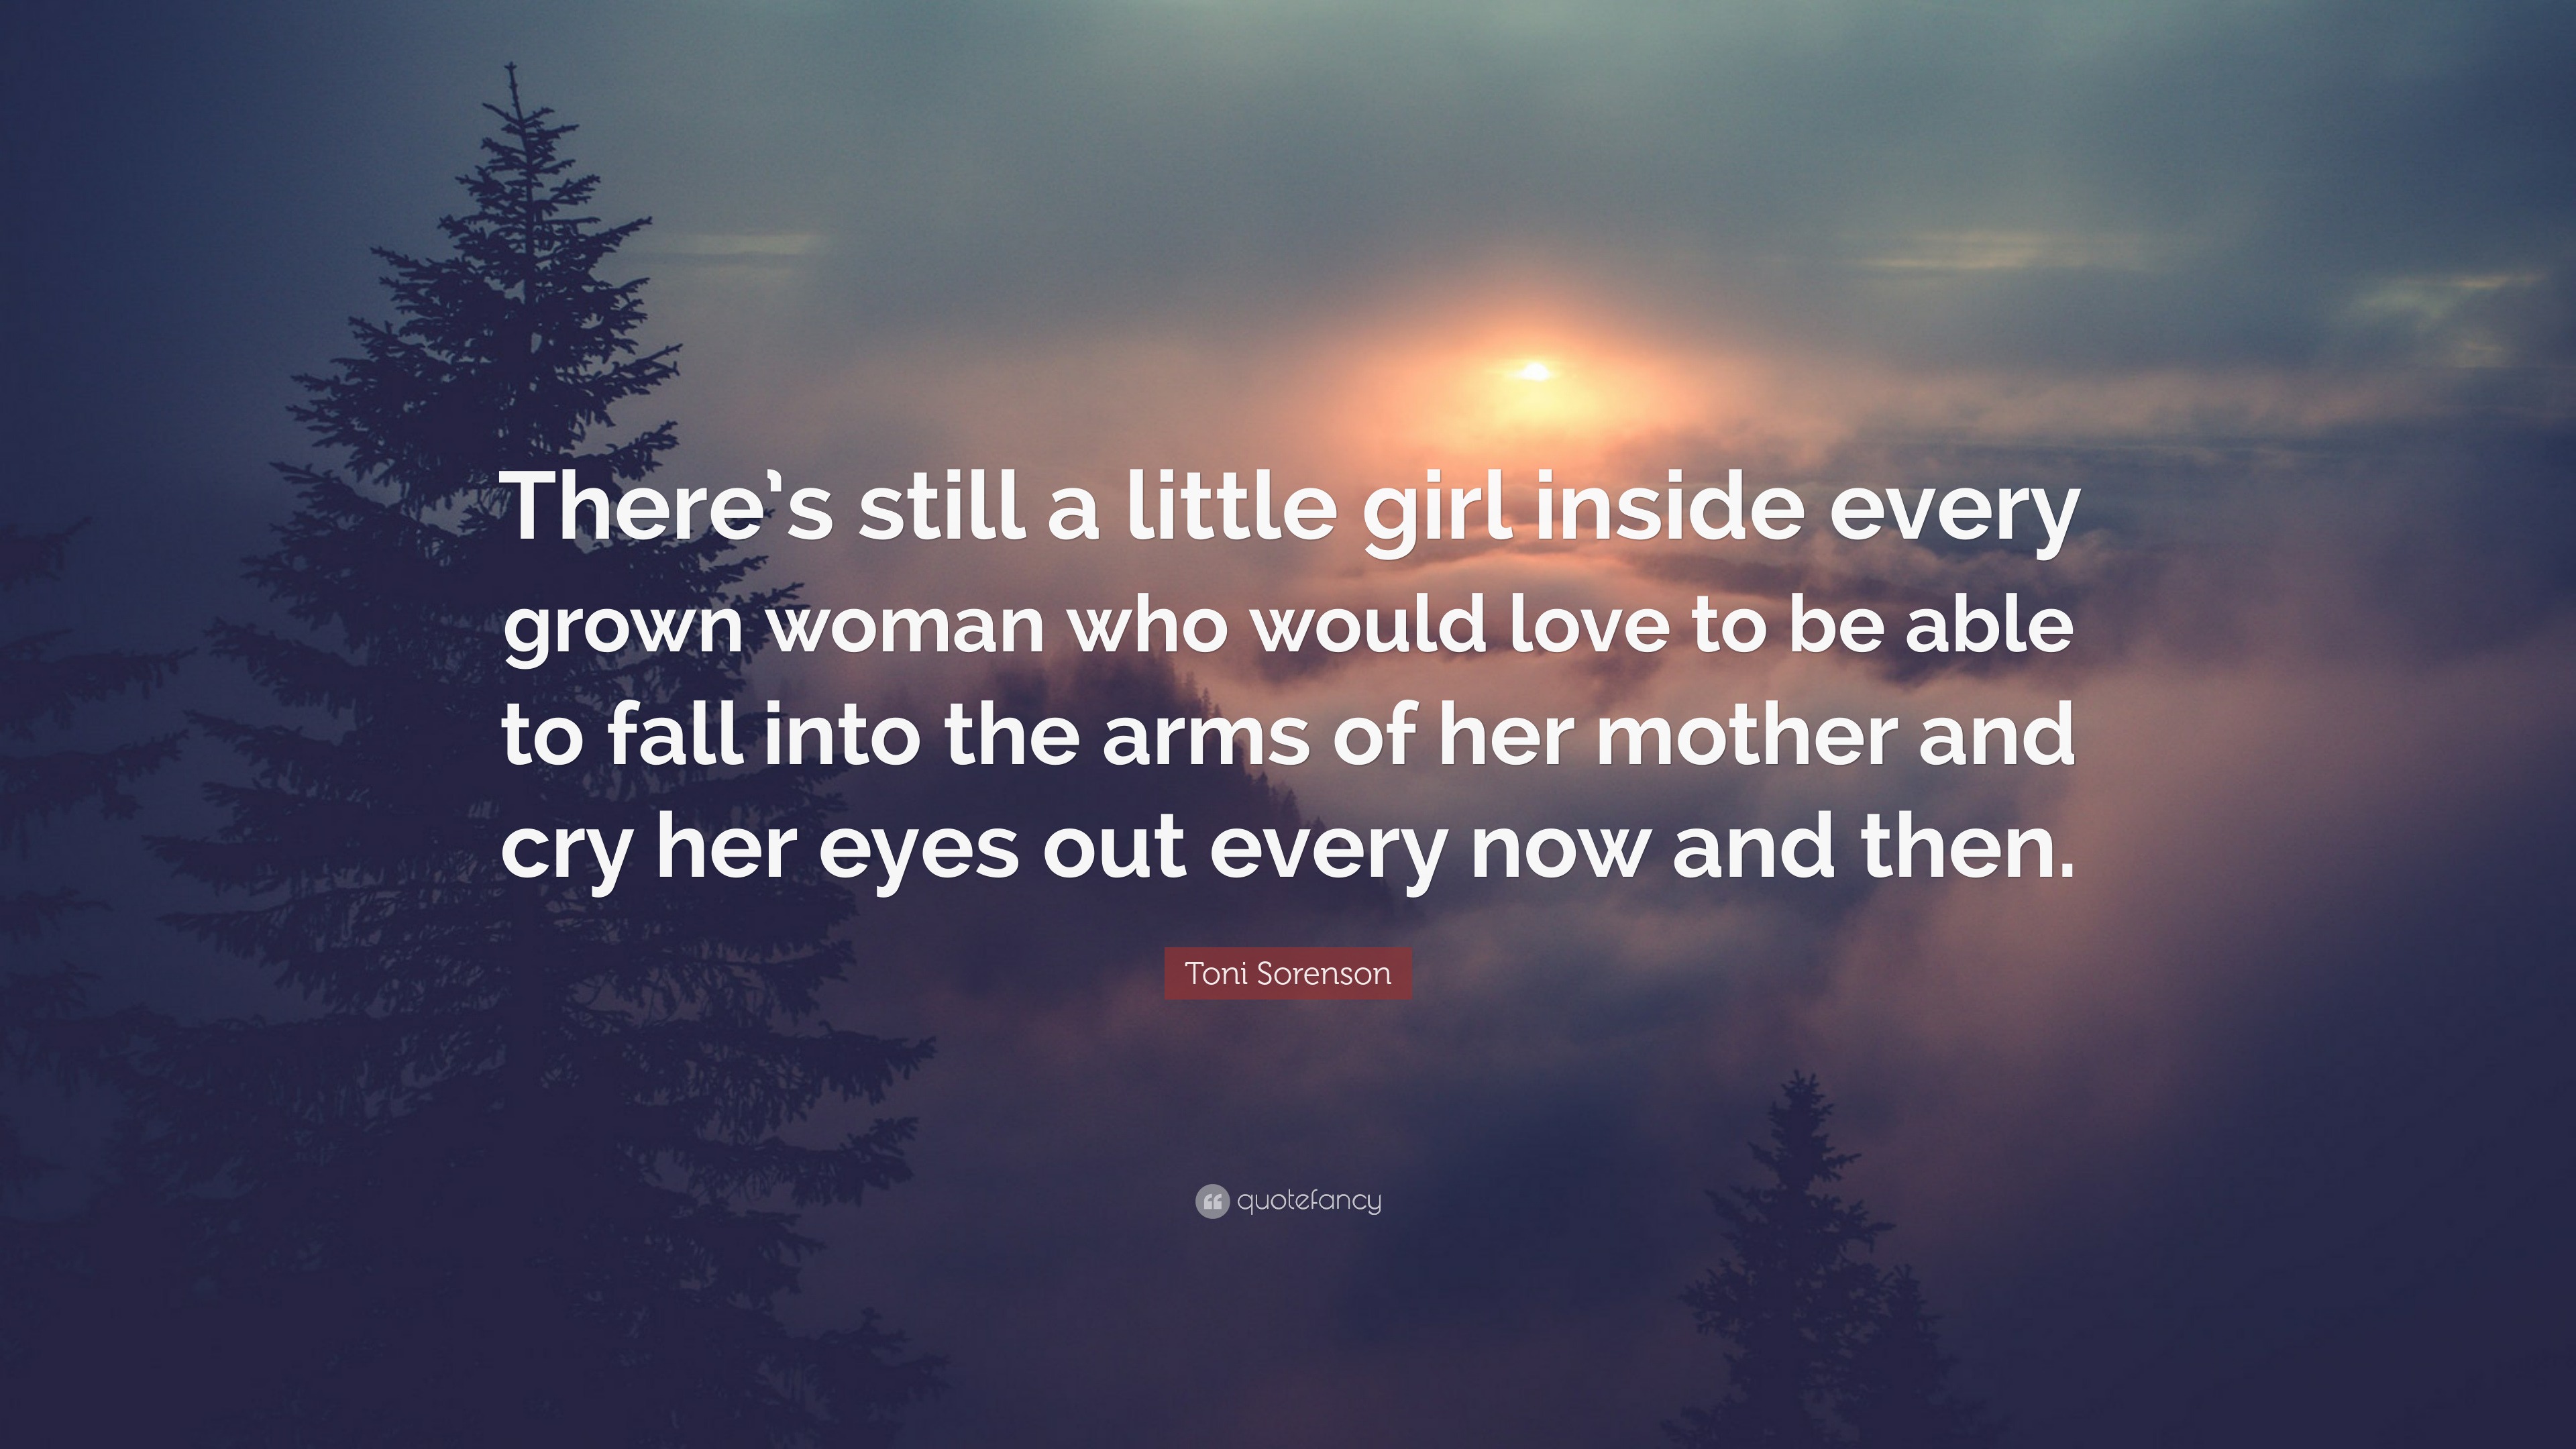 Toni Sorenson Quote: “There’s still a little girl inside every grown ...